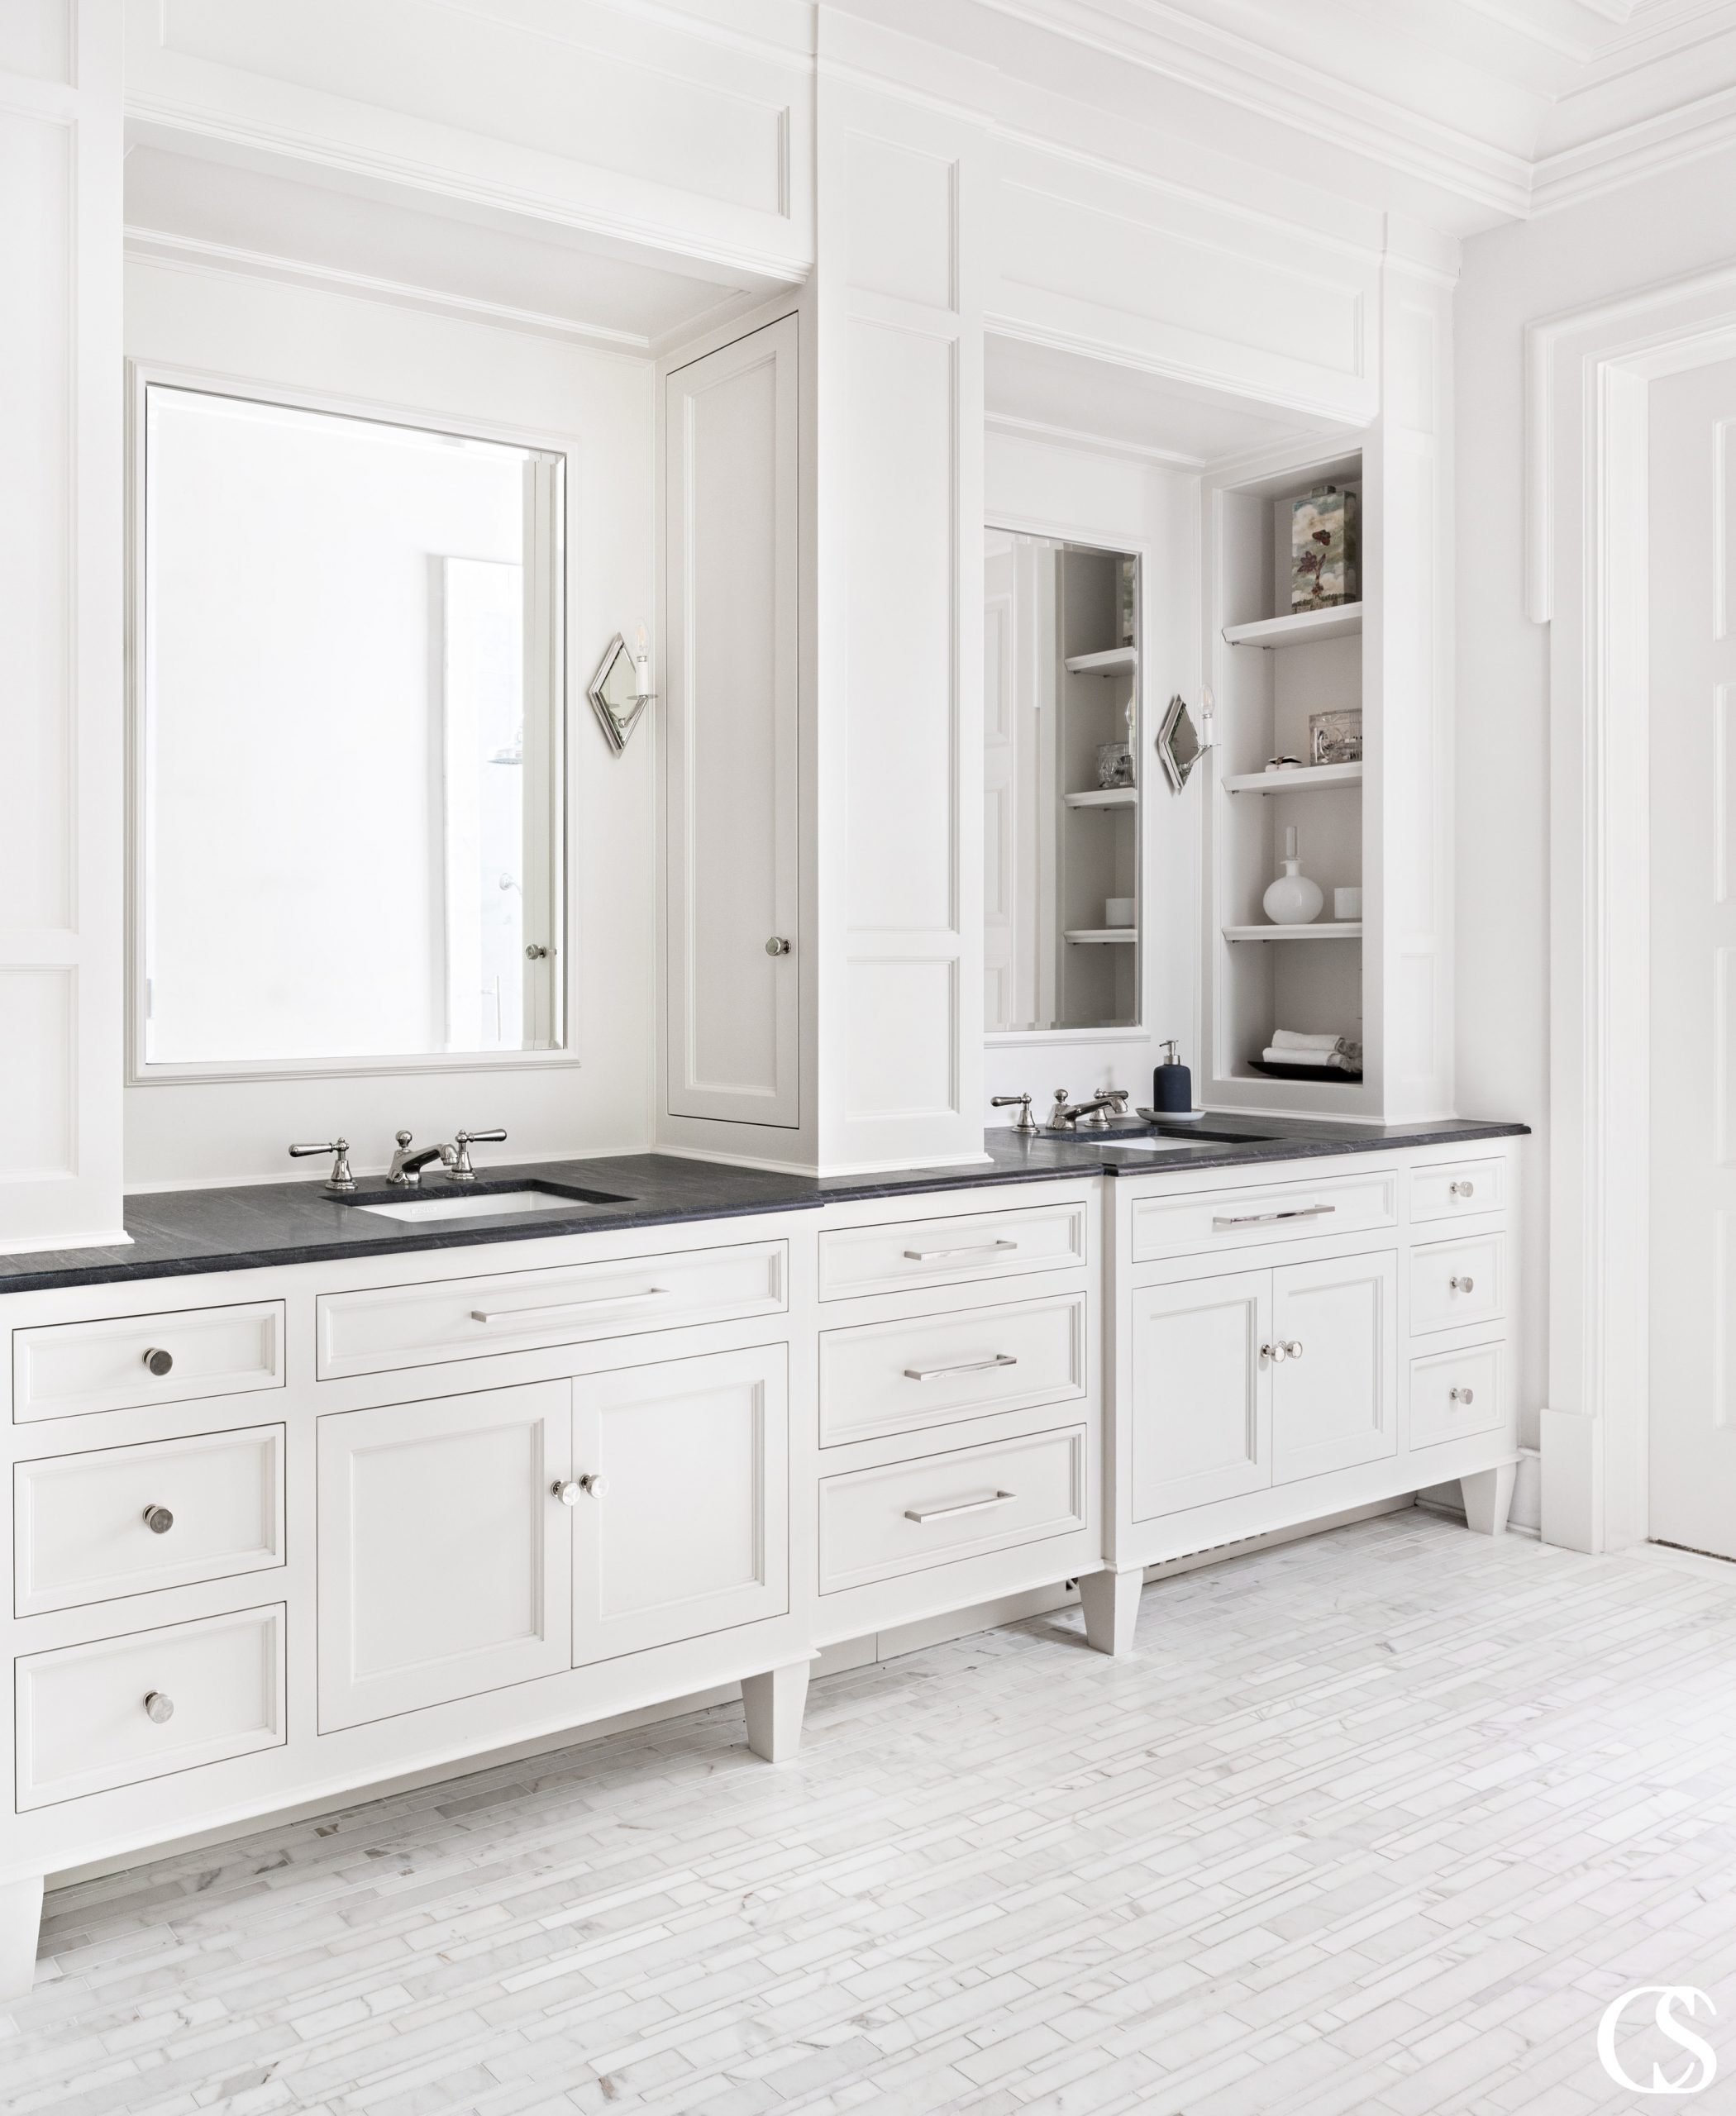 The white aesthetic is a complete classic. These custom bathroom cabinets play perfectly with a unique tile floor and large mirrors to create even more white space.